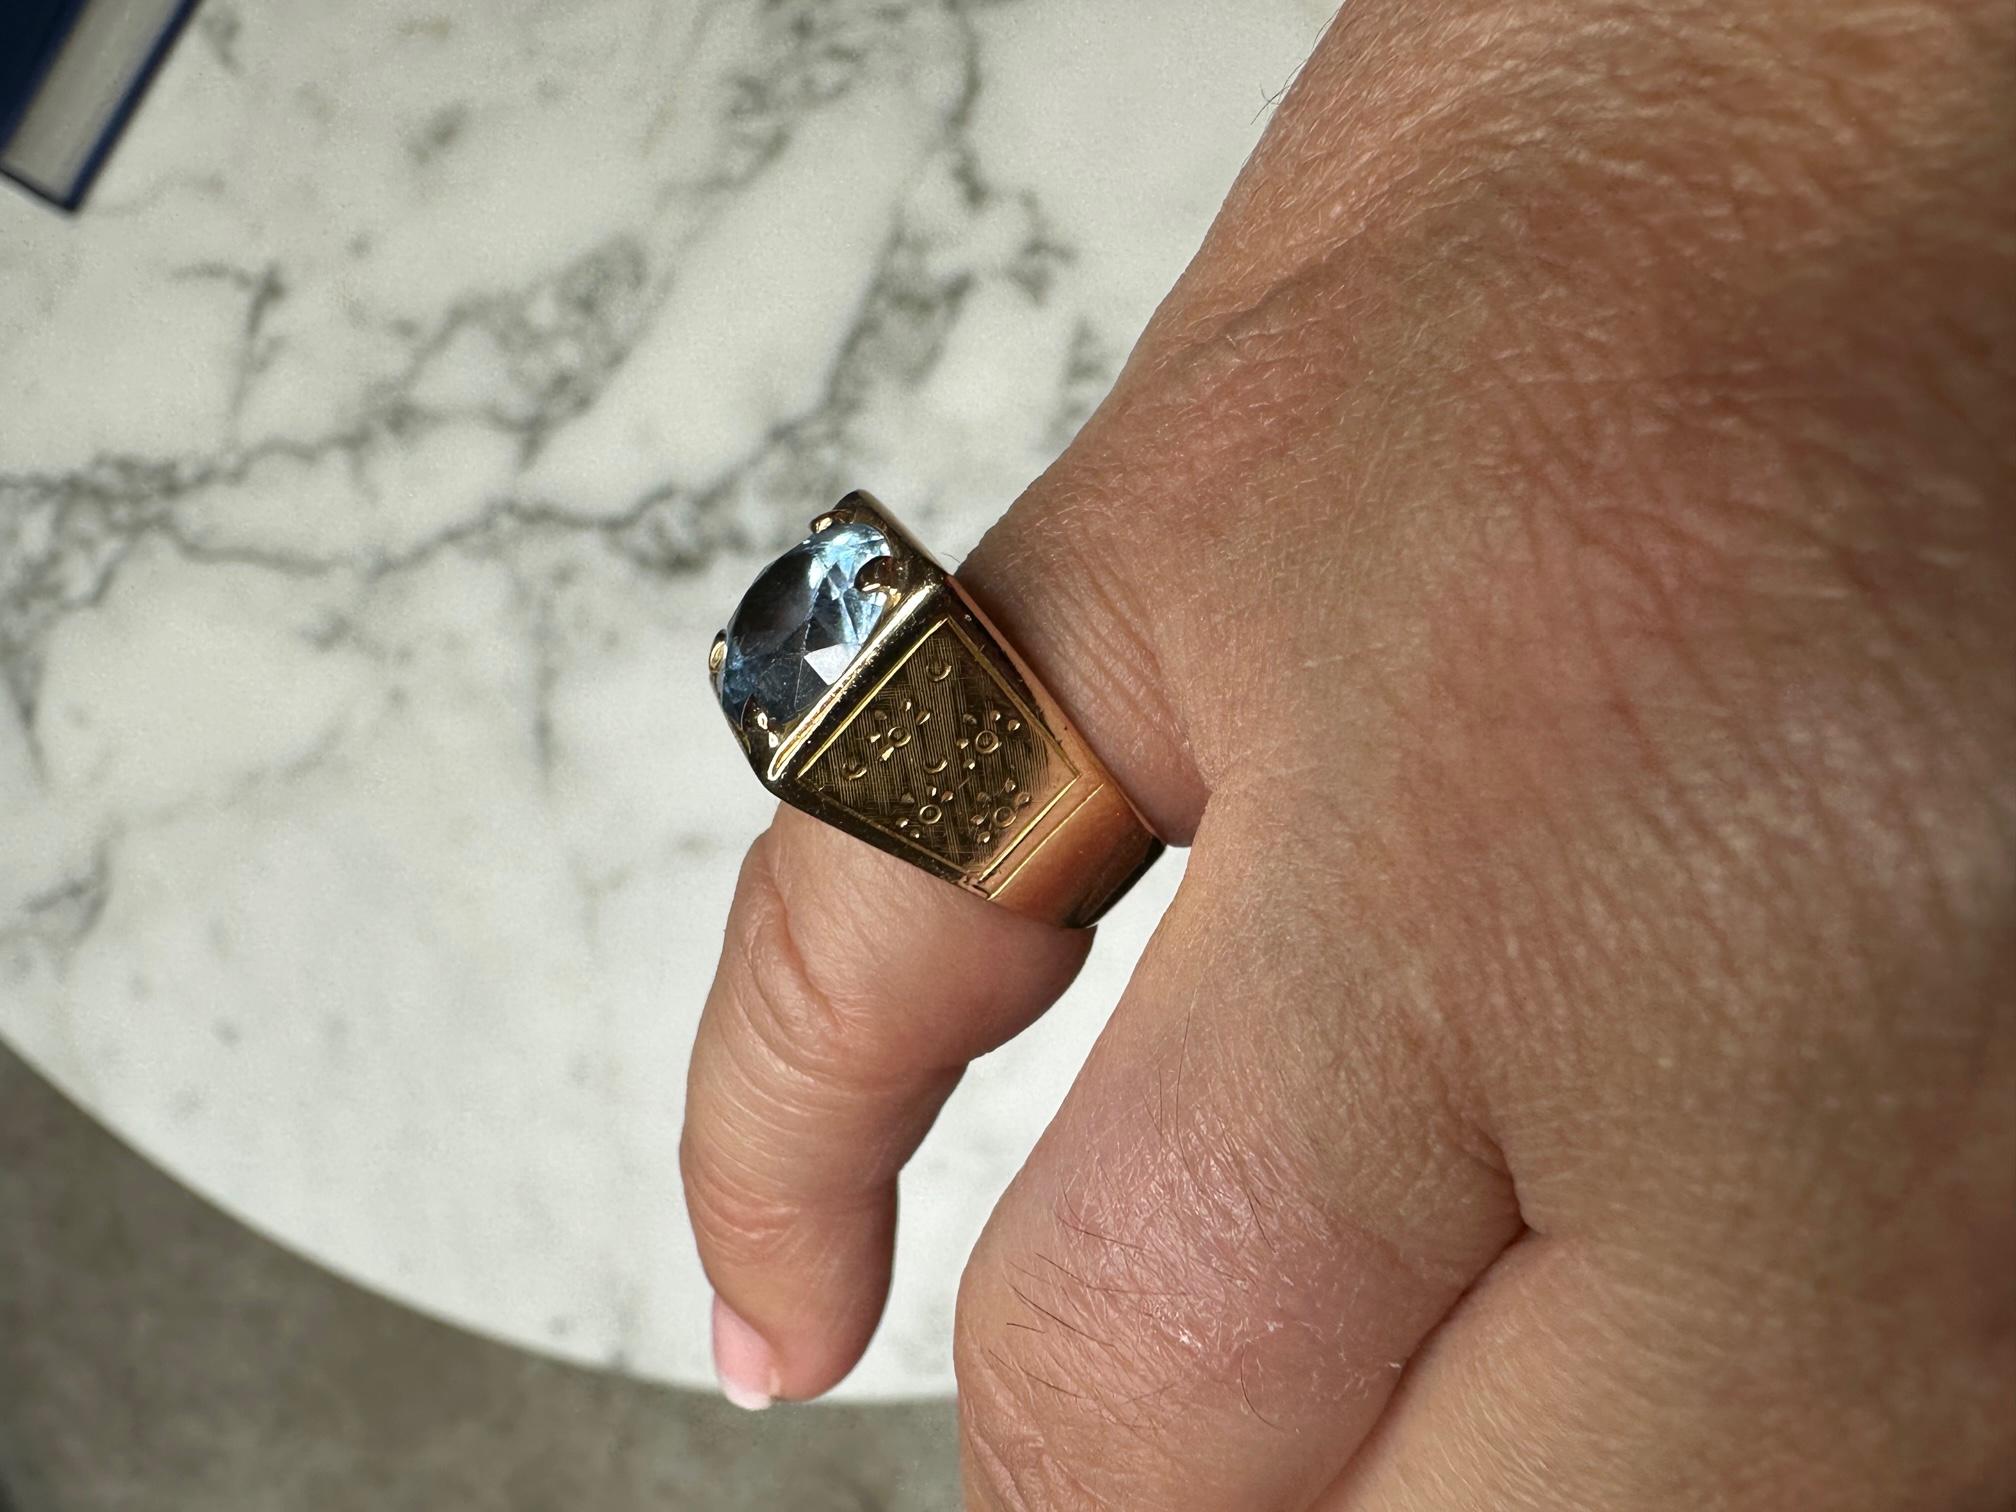 This beautiful vintage French style signet ring is a rare and beautiful piece. It is made of 18 carat yellow gold, which brings a timeless elegance to the ring. In the centre of the ring, a stunning azure blue aquamarine is carefully set, reflecting